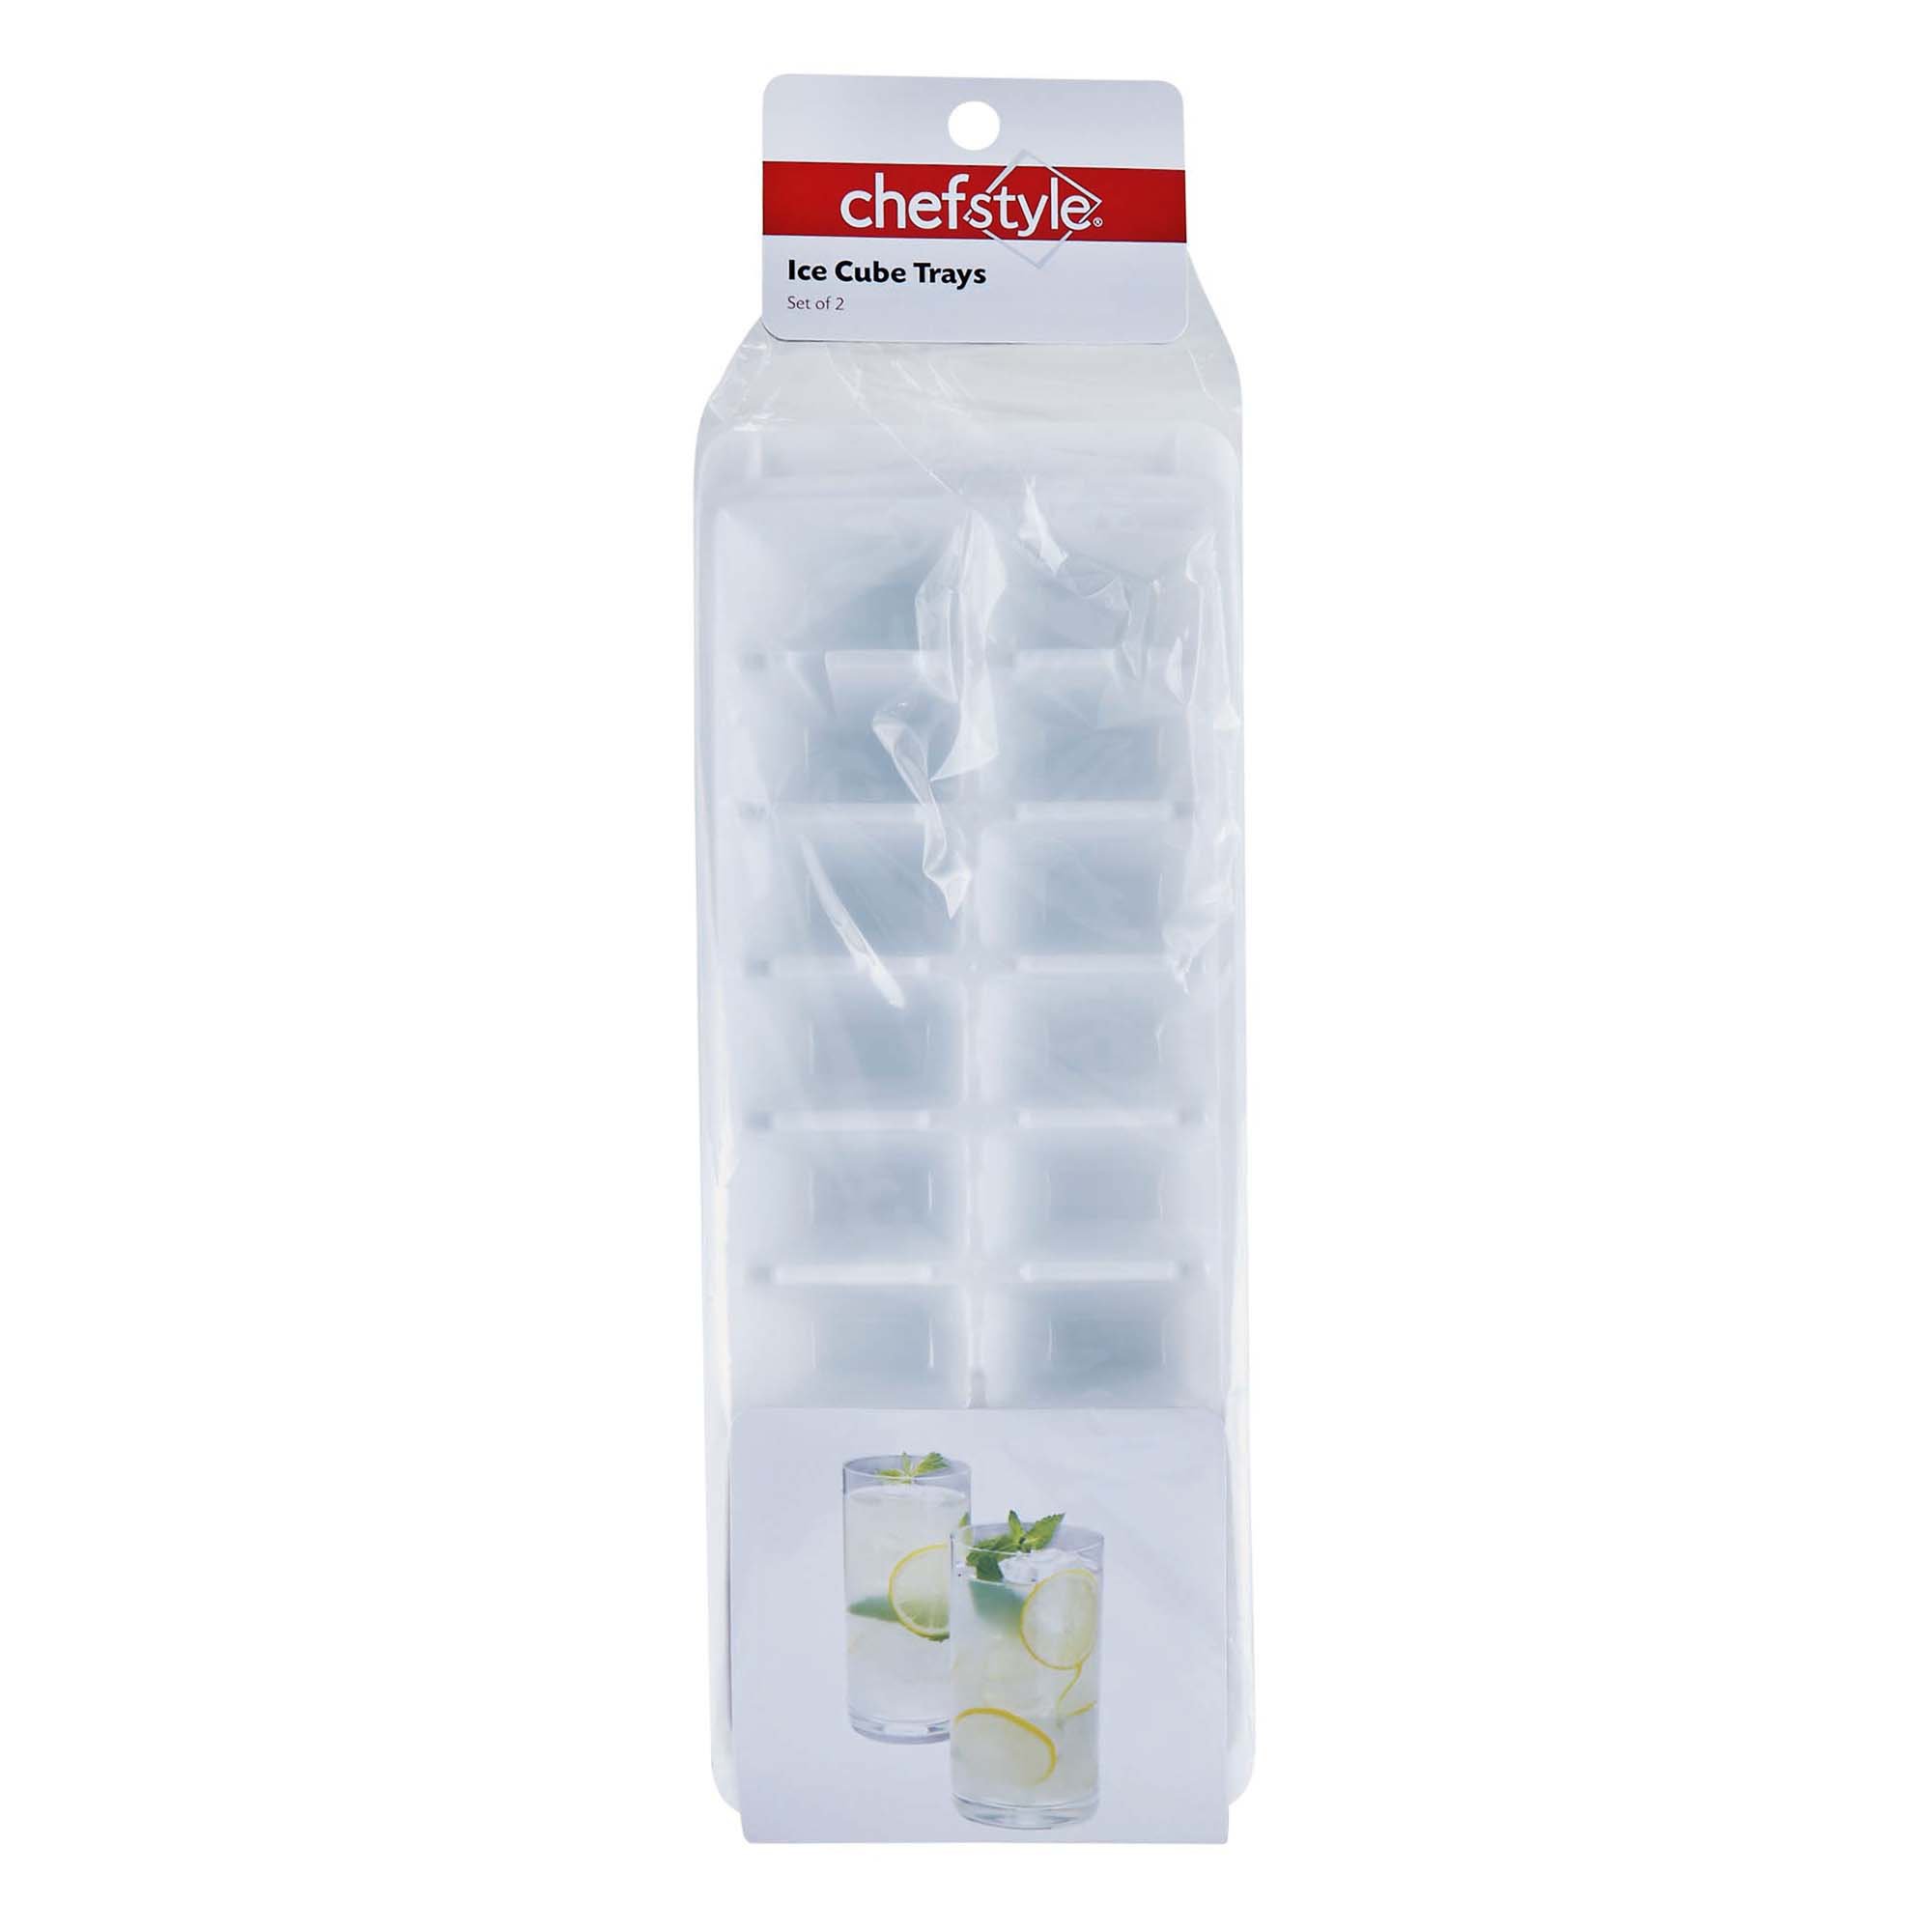 chefstyle White Ice Cube Trays